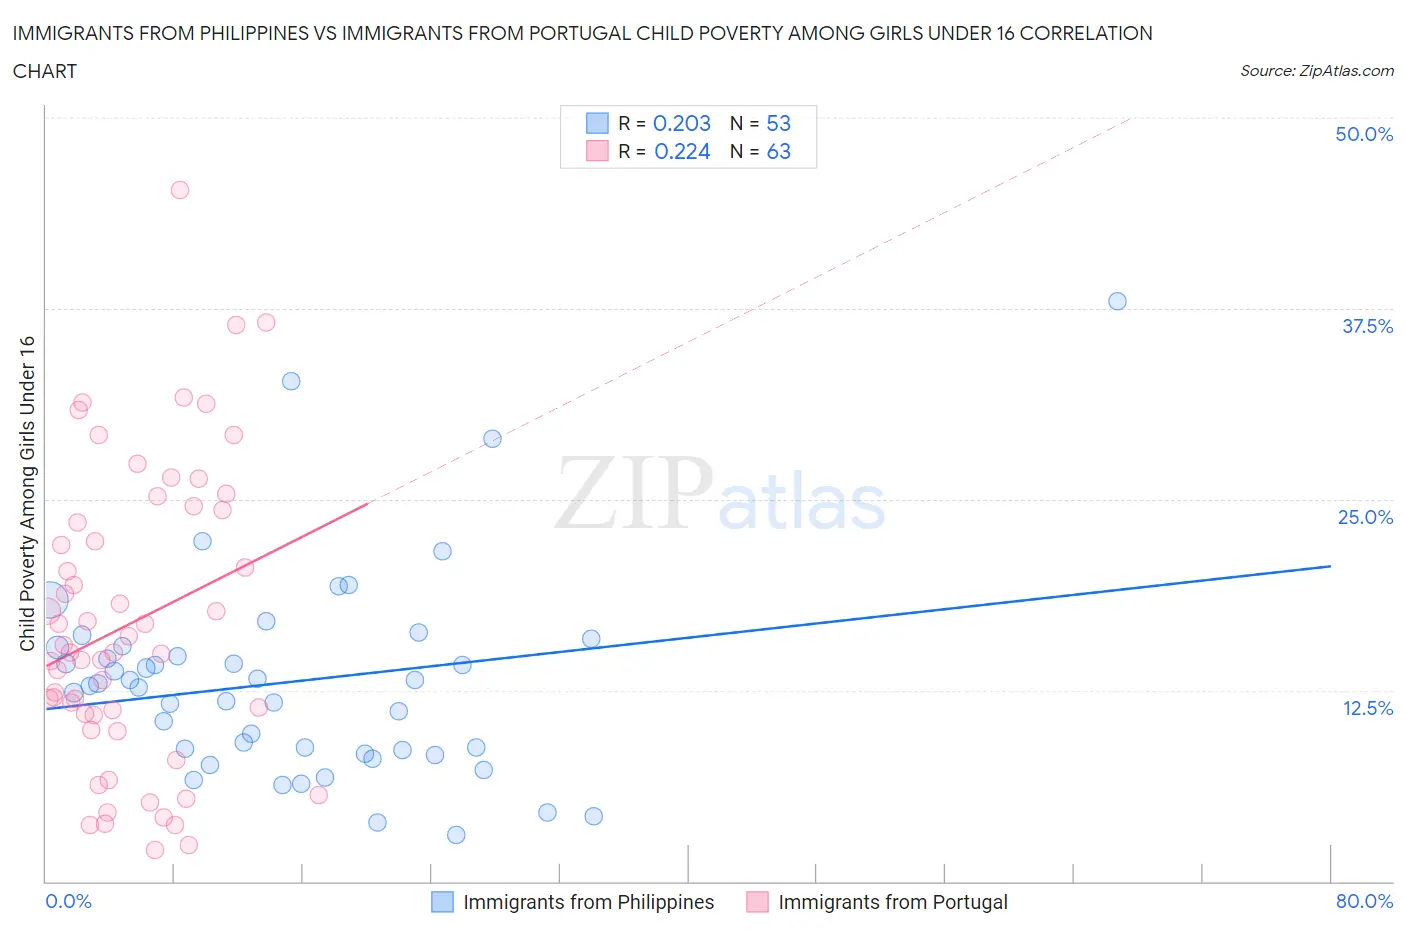 Immigrants from Philippines vs Immigrants from Portugal Child Poverty Among Girls Under 16